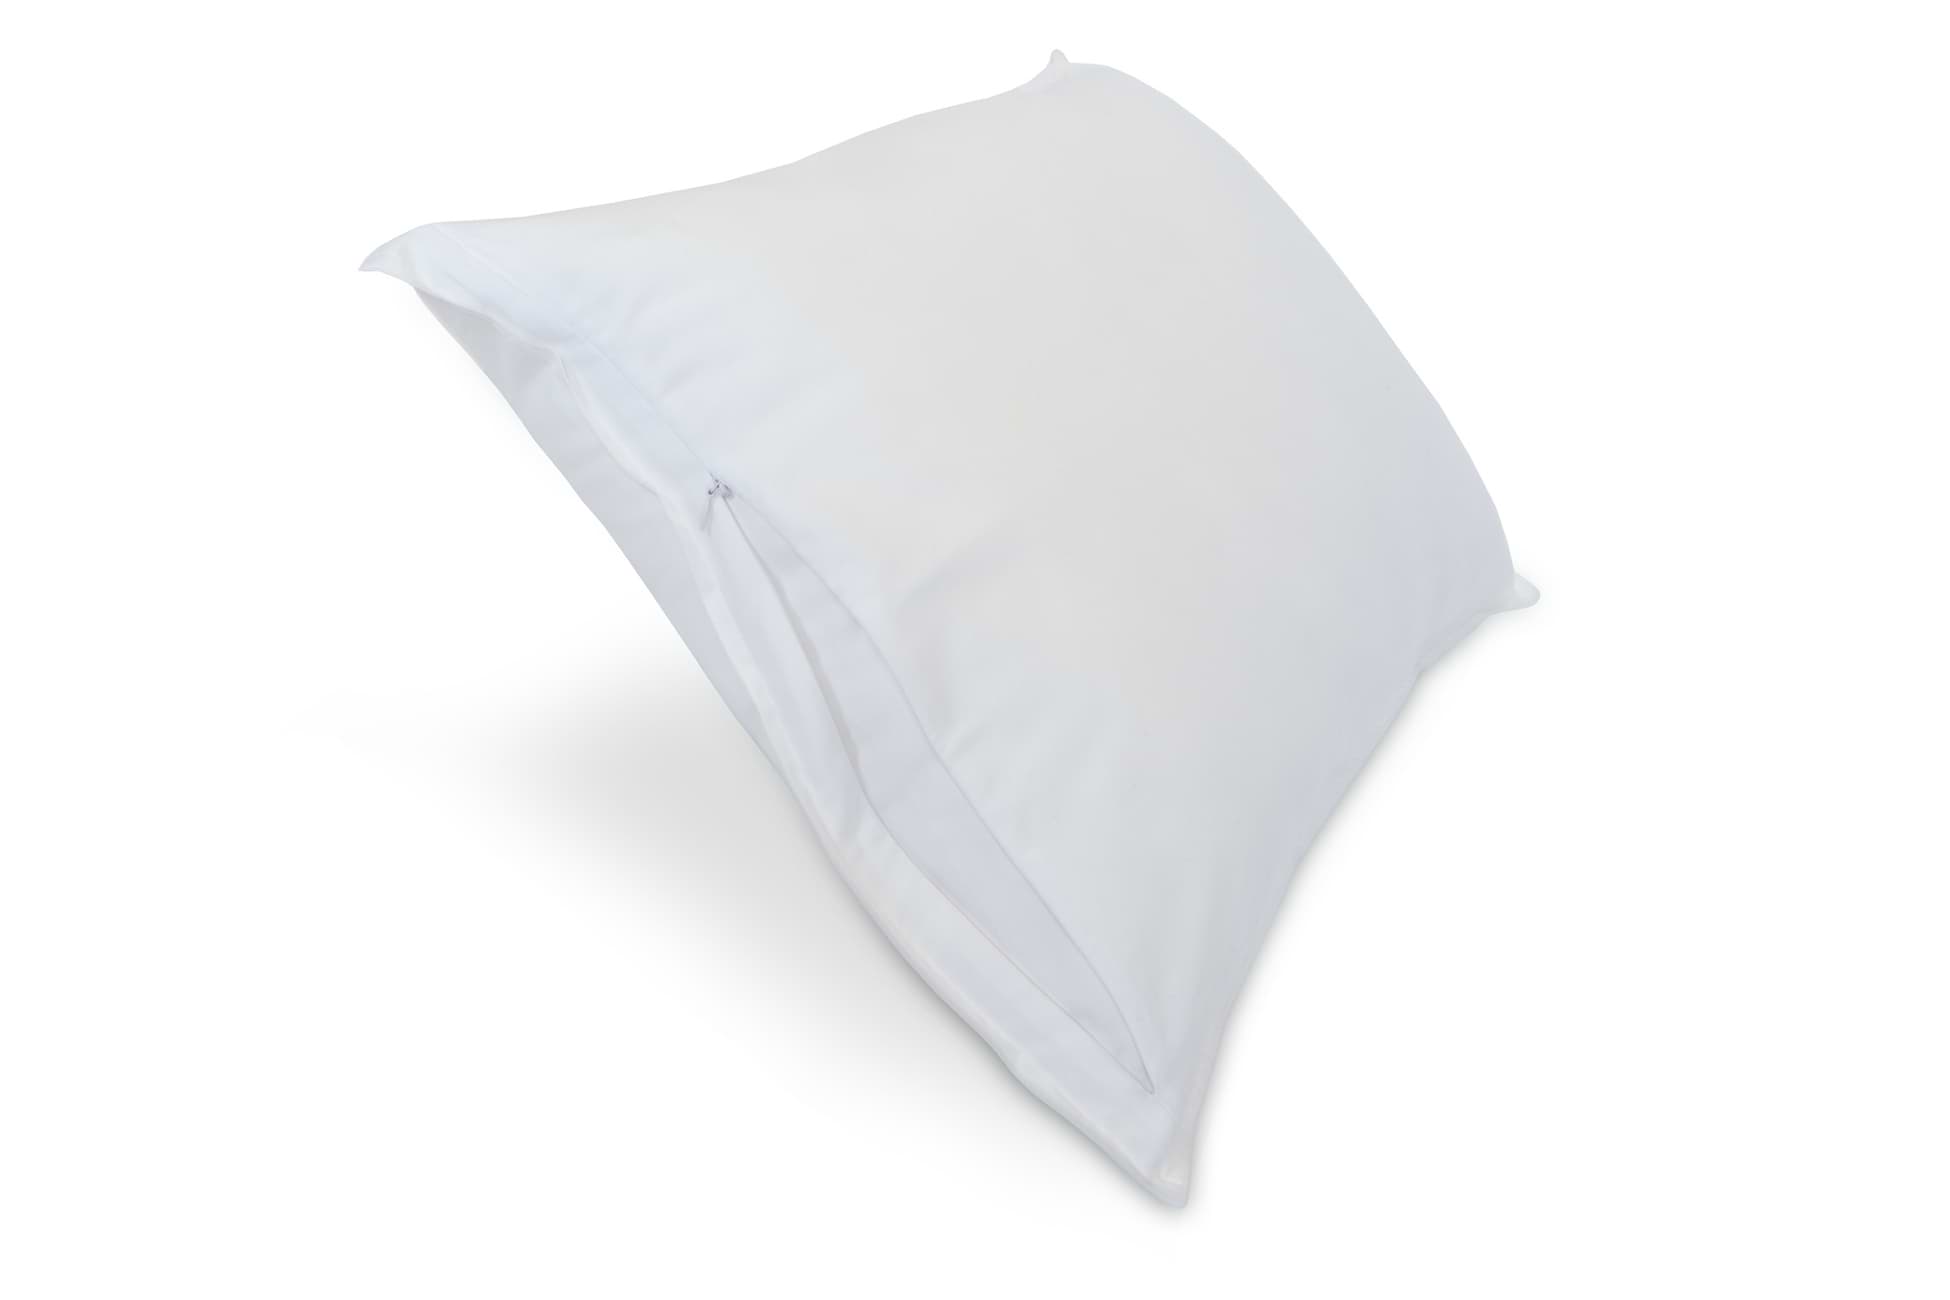 Martex Purity Stay Fresh Pillow